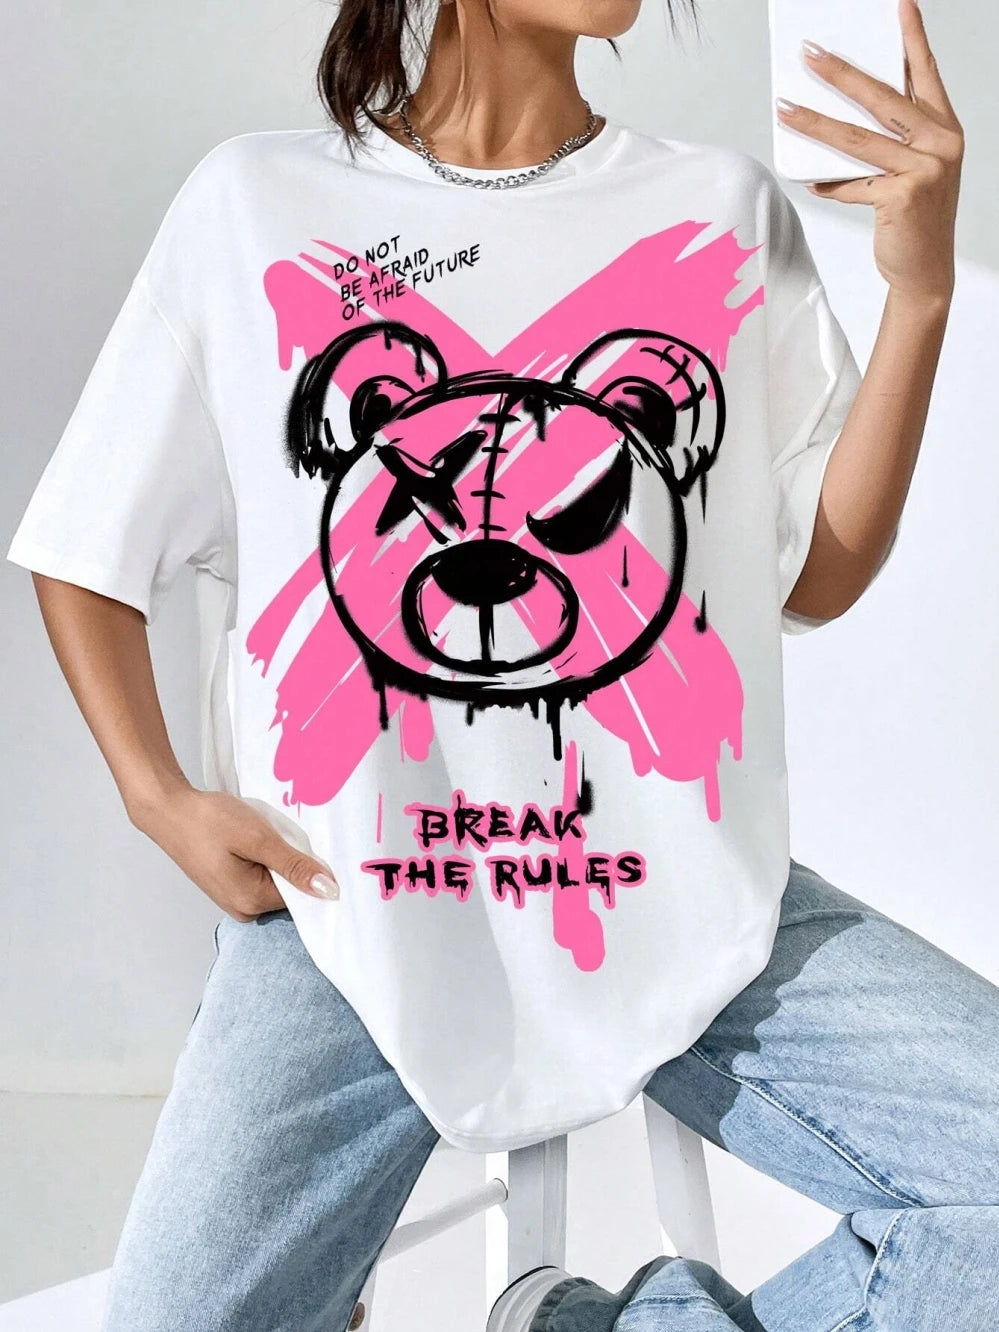 Break The Rules X Doodle Bear Printing tees Cotton Women T-Shirts Casual Soft Short Sleeve Tops Loose Comfortable Street Clothes